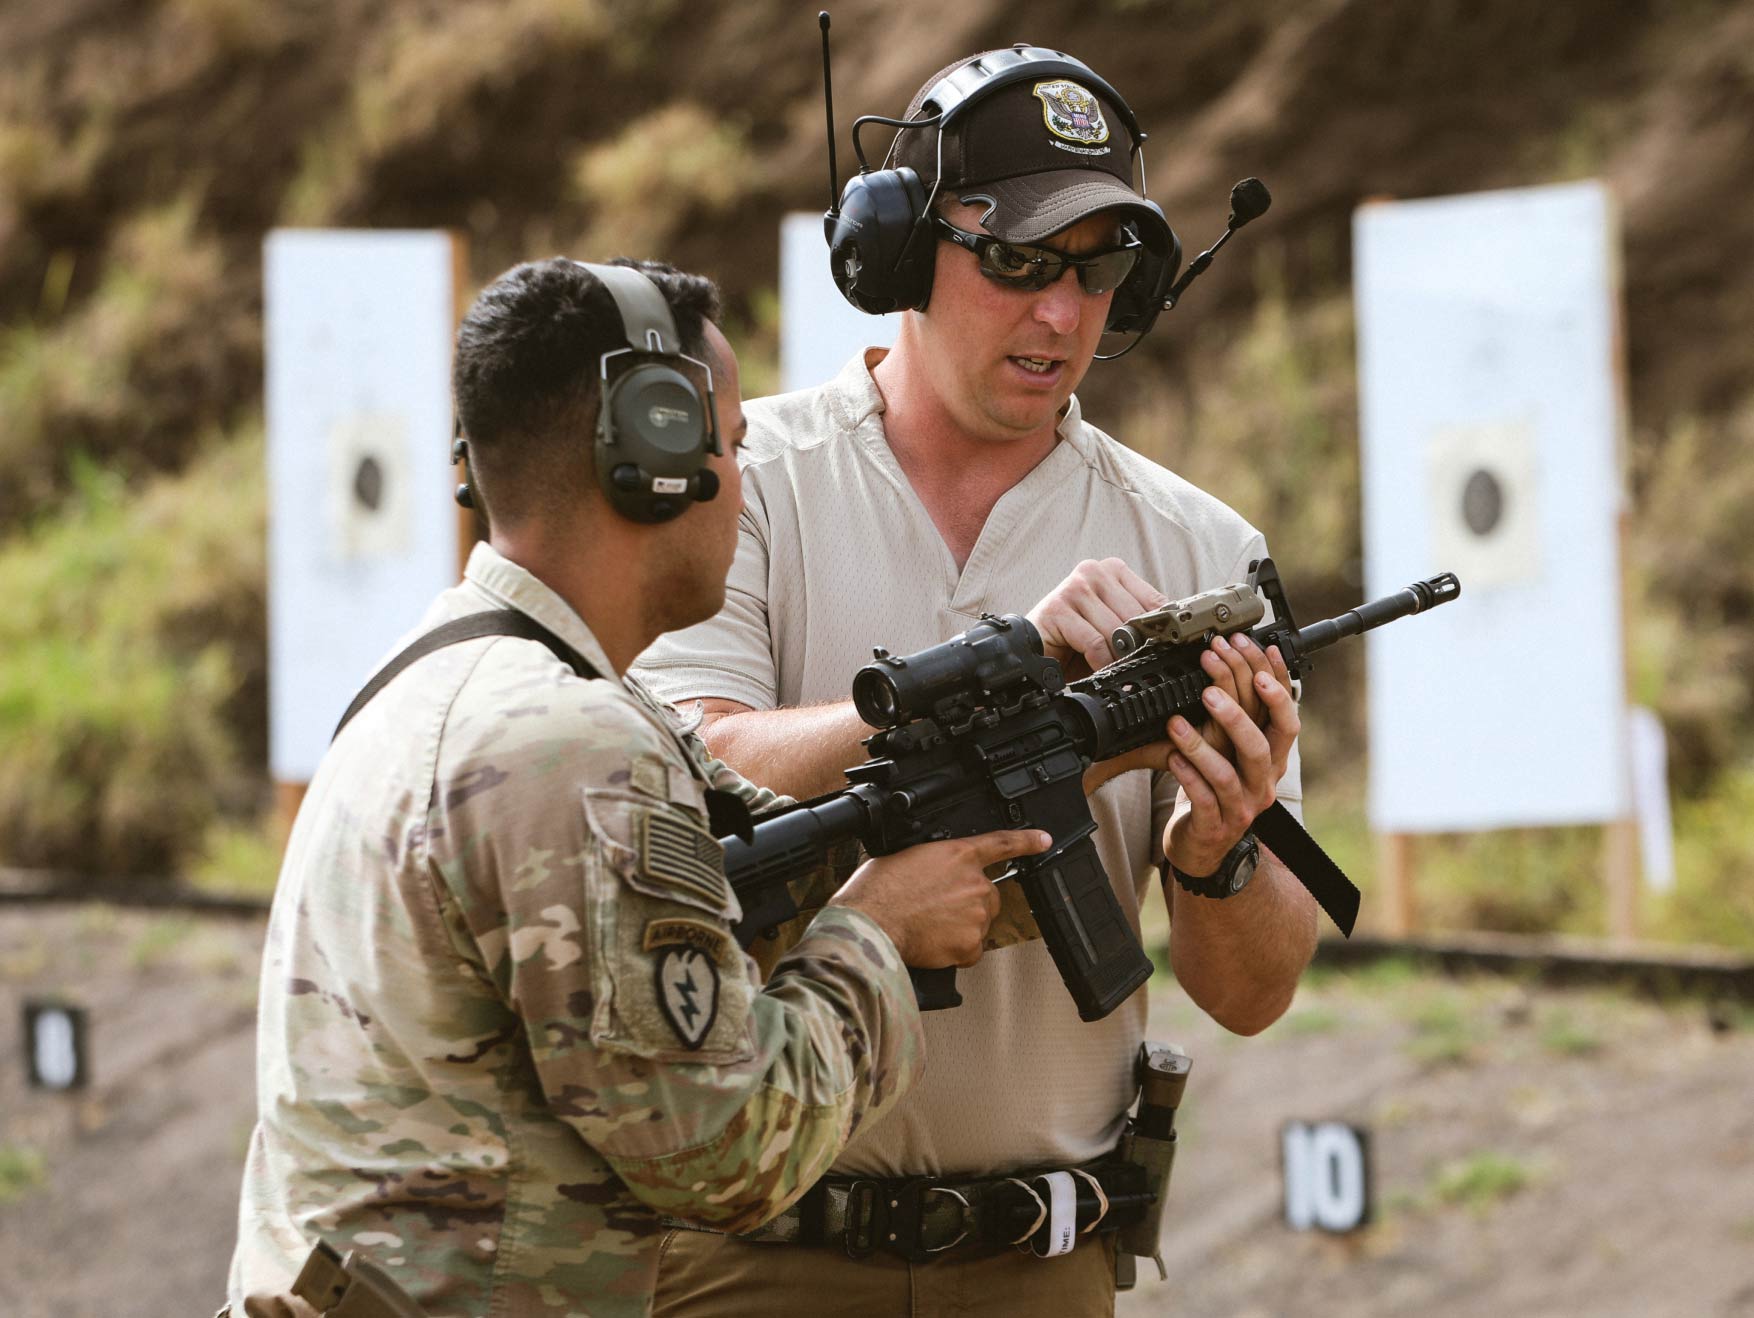 An Army Marksmanship Unit instructor adjusts the rifle a Soldier is holding at a shooting range